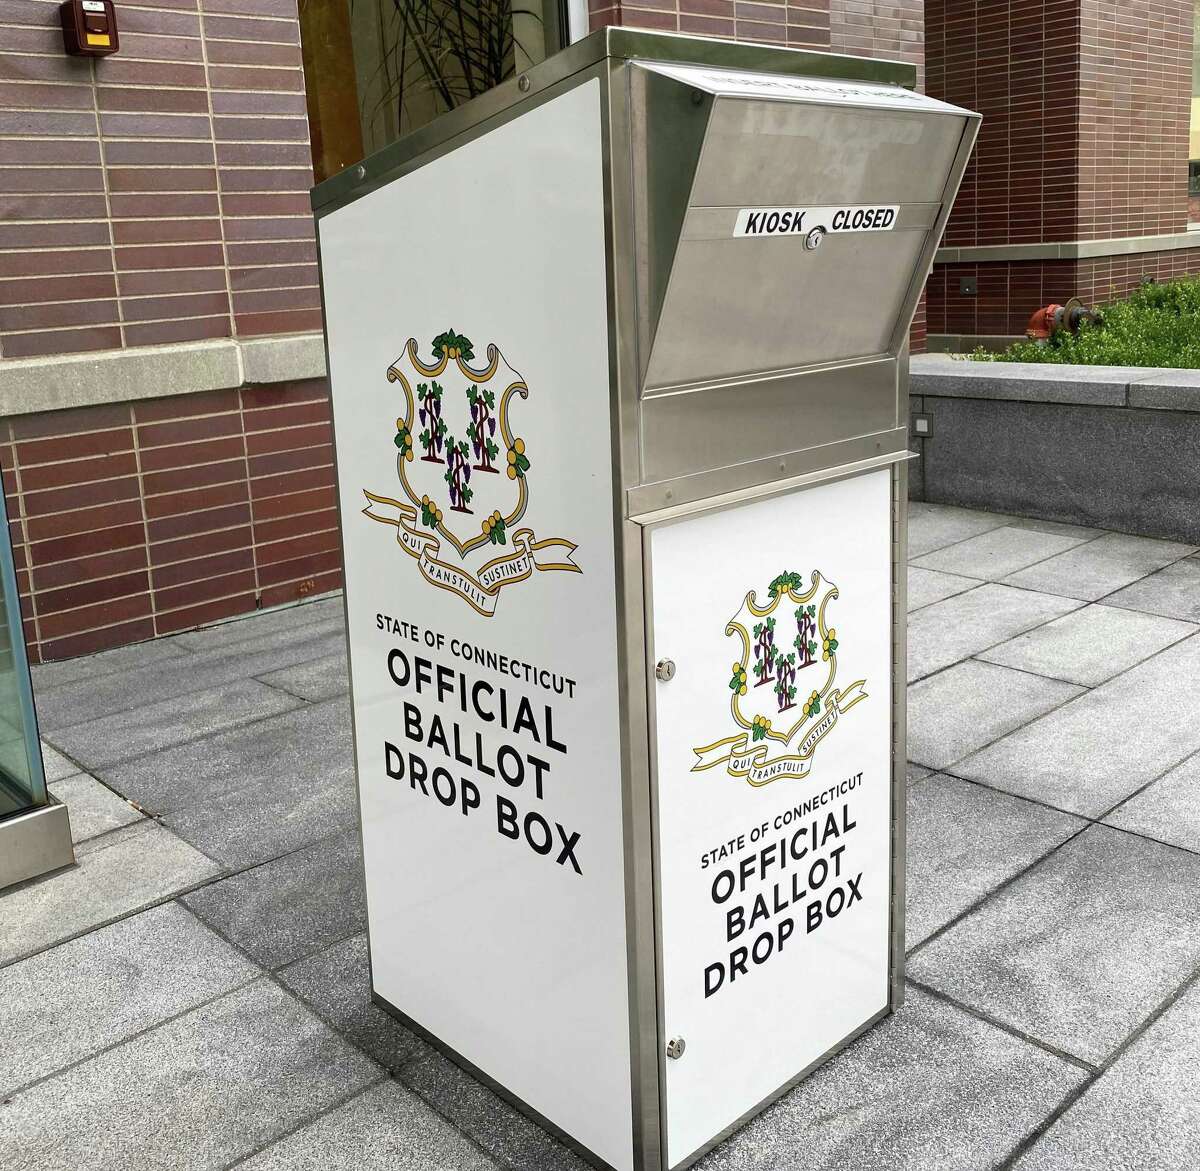 This is the ballot box in front of New Canaan Town Hall that can be used for absentee ballots for the referendum, after a recent executive order from Gov. Ned Lamont.